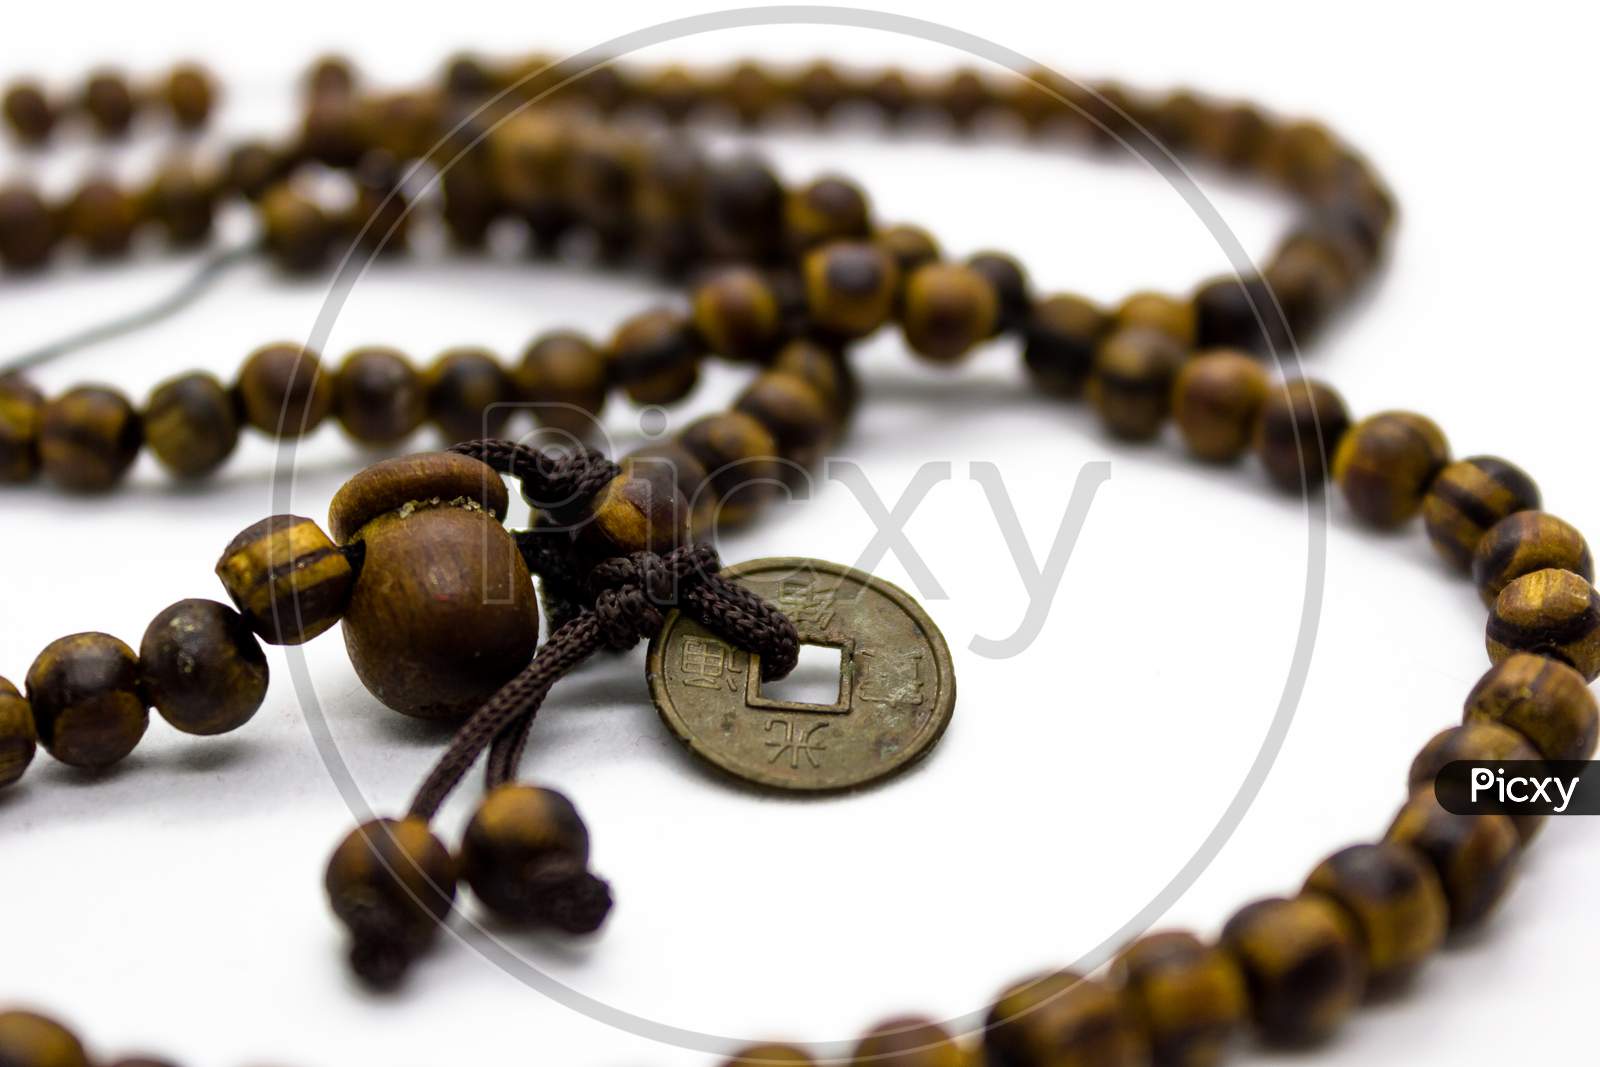 Round Beads With Locket Representing Buddhist Hindu Religion Philosophy From Asian Countries